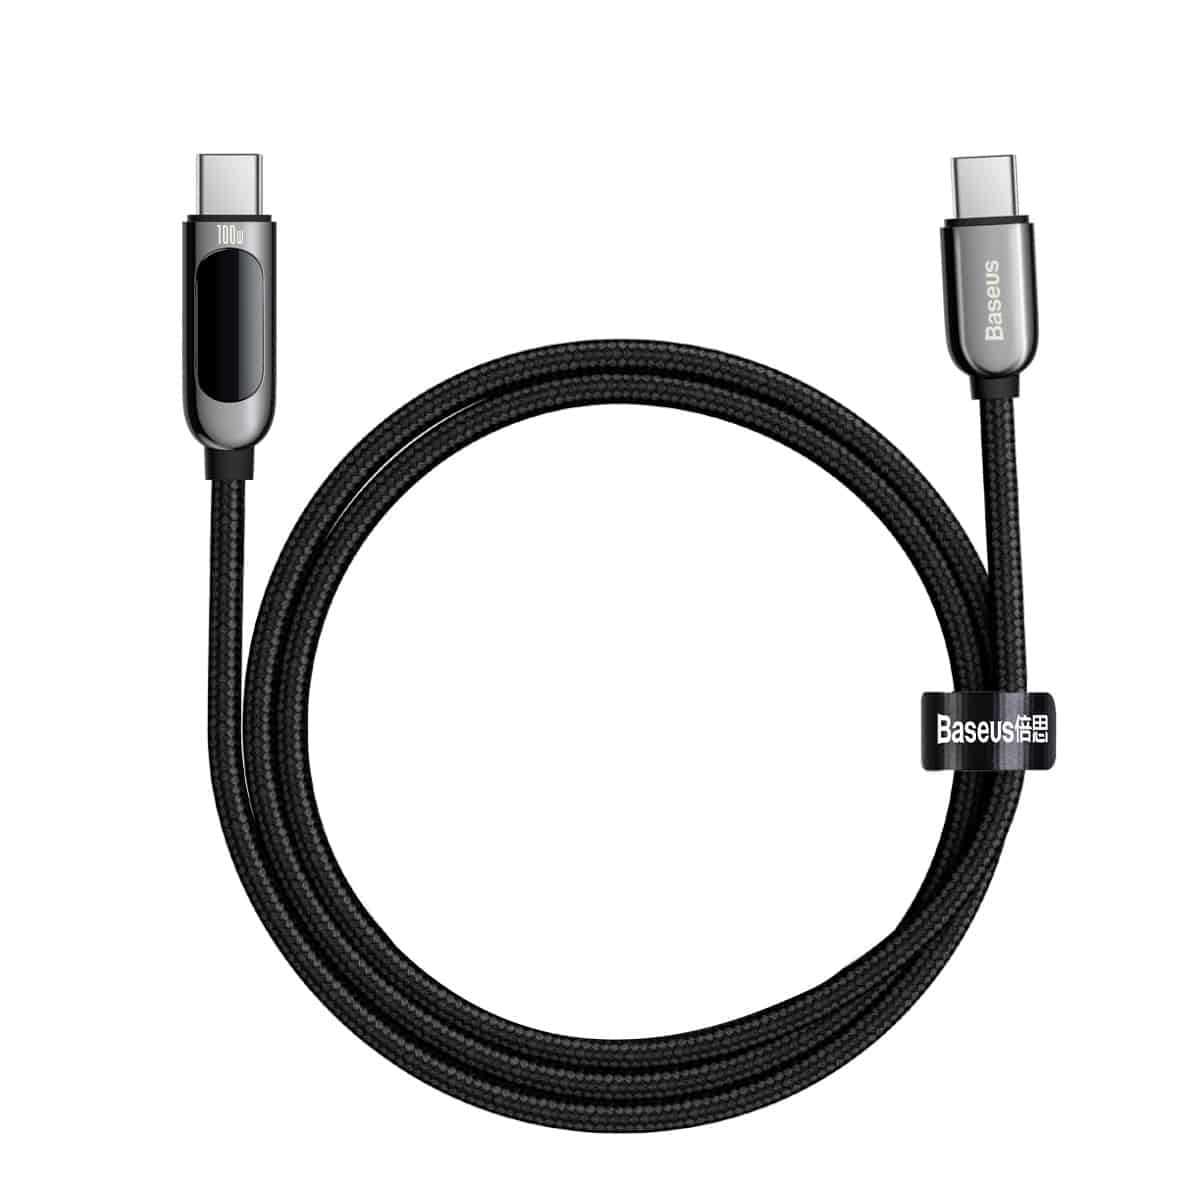 (Buy 1 Get 1) Baseus Display 100W Type-C to Type-C Fast Charging Data Cable (2M) - Grey + Black